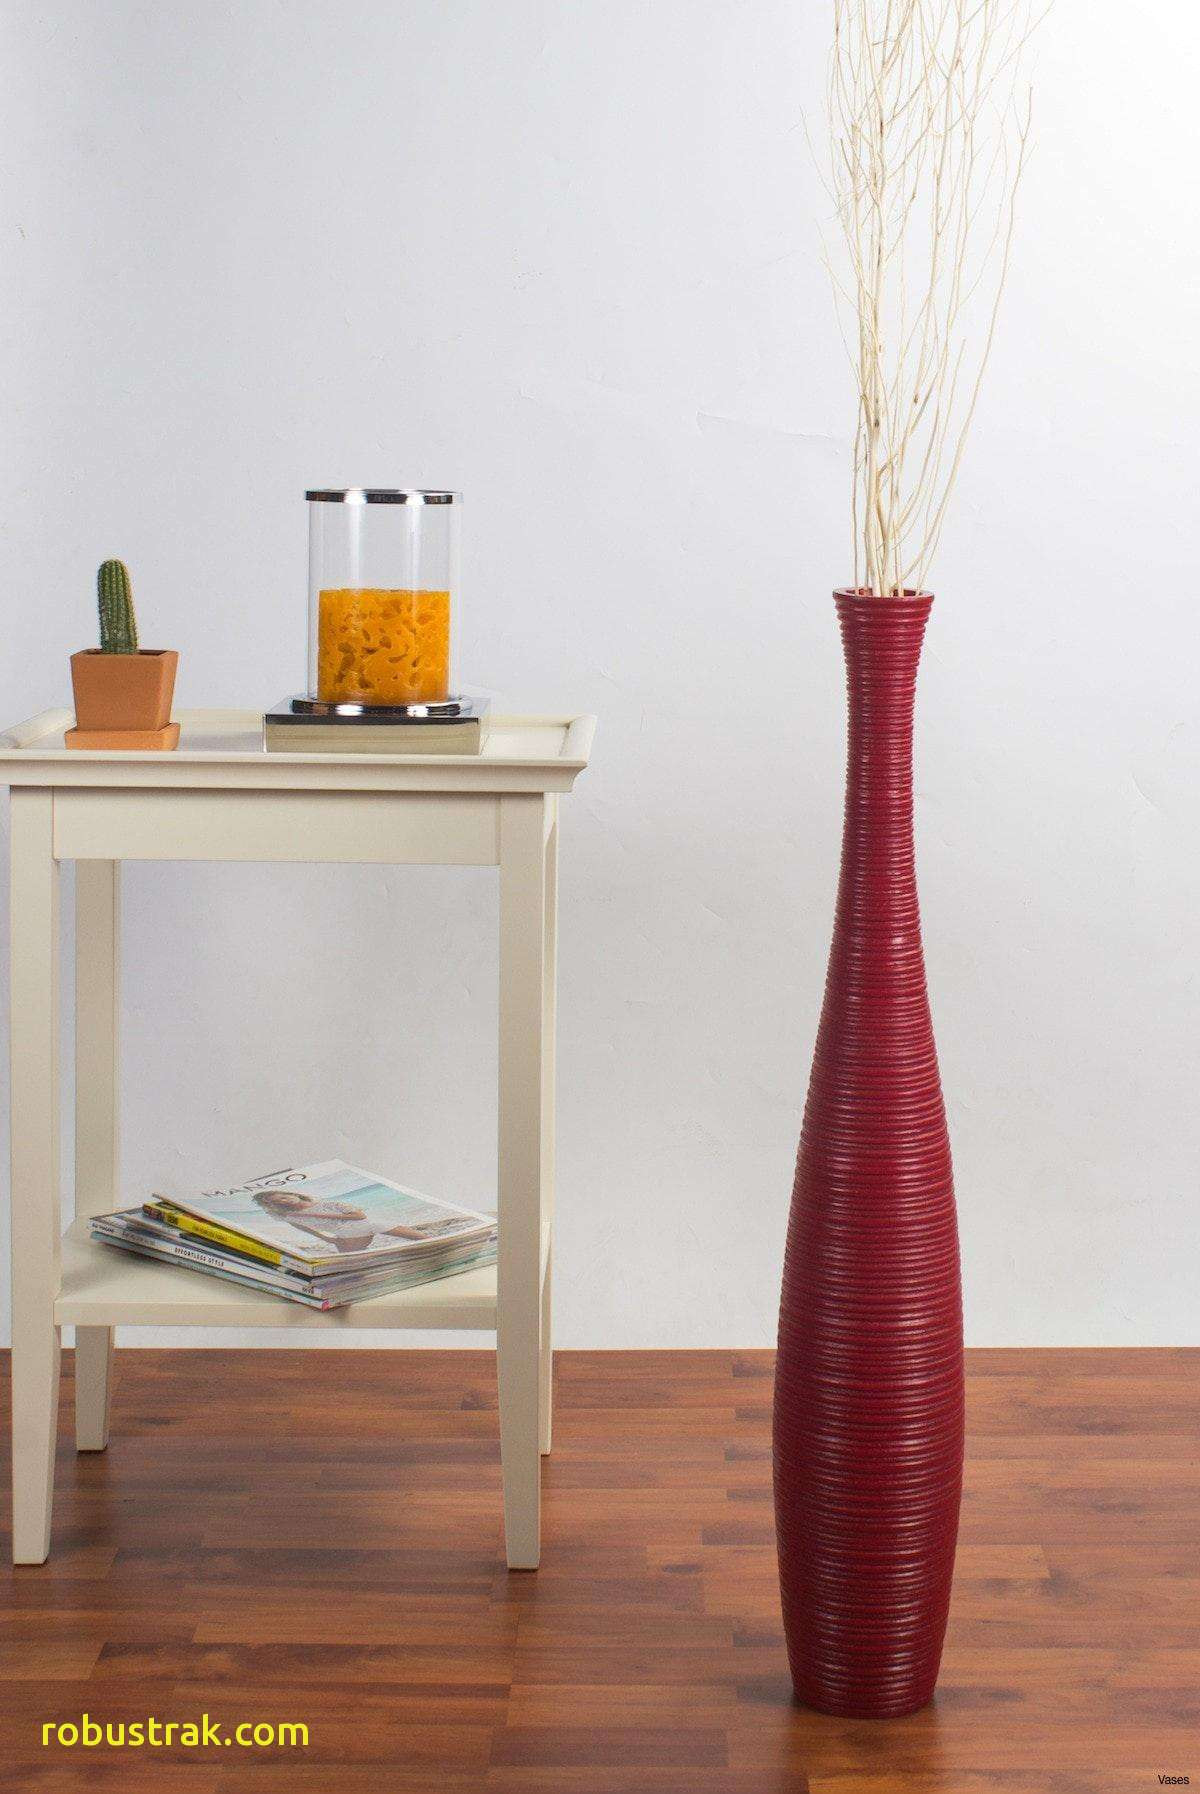 27 Elegant Holiday Vase Filler 2023 free download holiday vase filler of elegant decorating with vases home design ideas regarding how to decorate living room table unique living room red vases luxury tall red vaseh vases